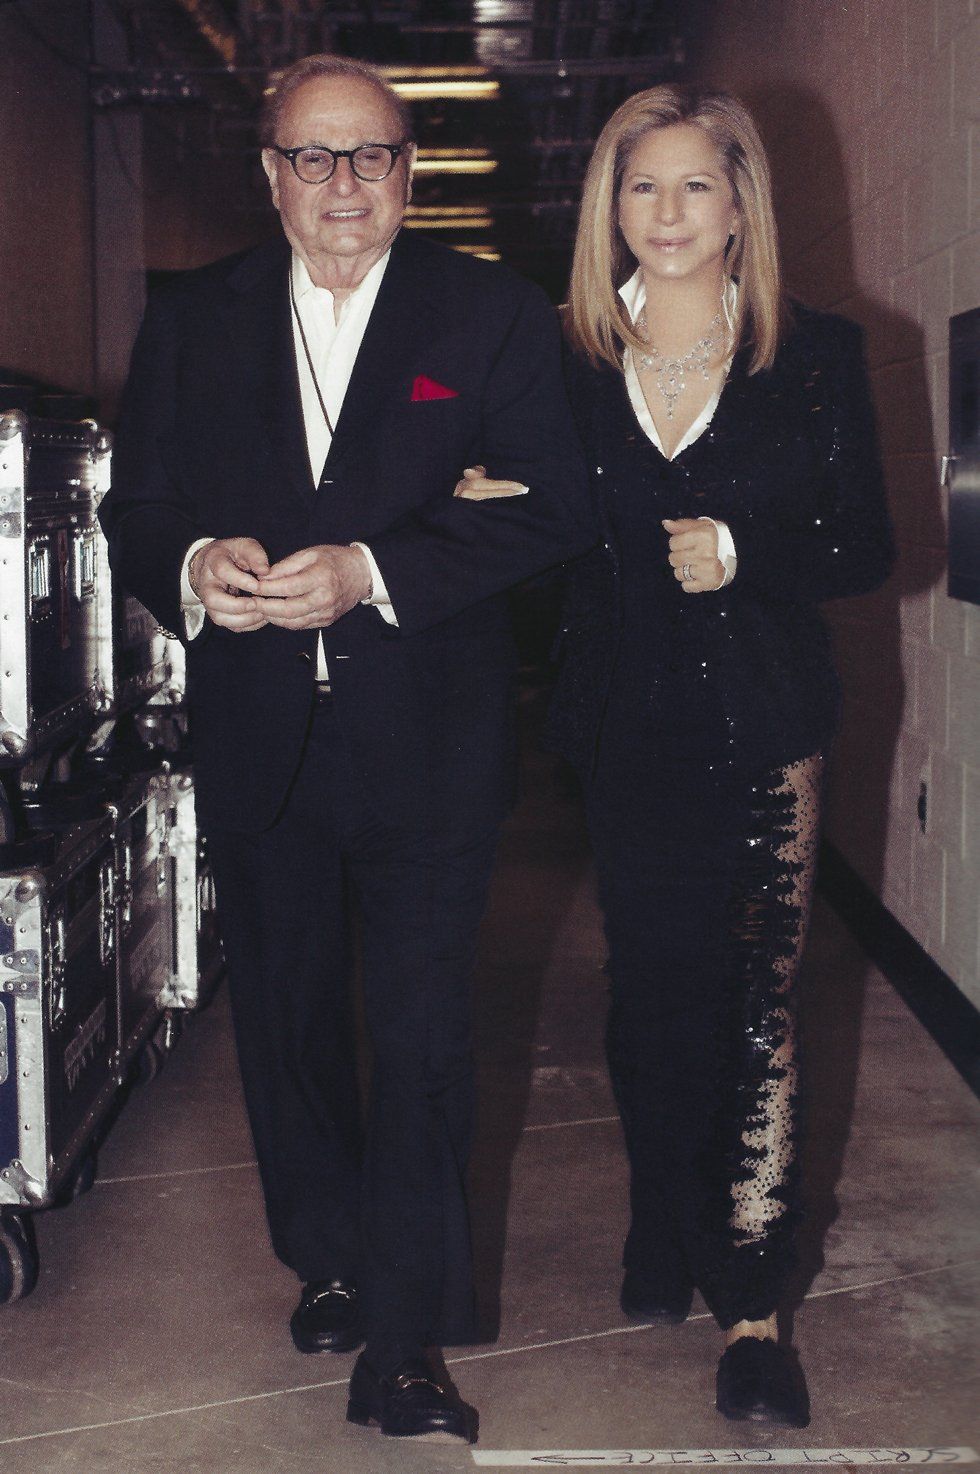 Marty Erlichman and Barbra Streisand pose together backstage.